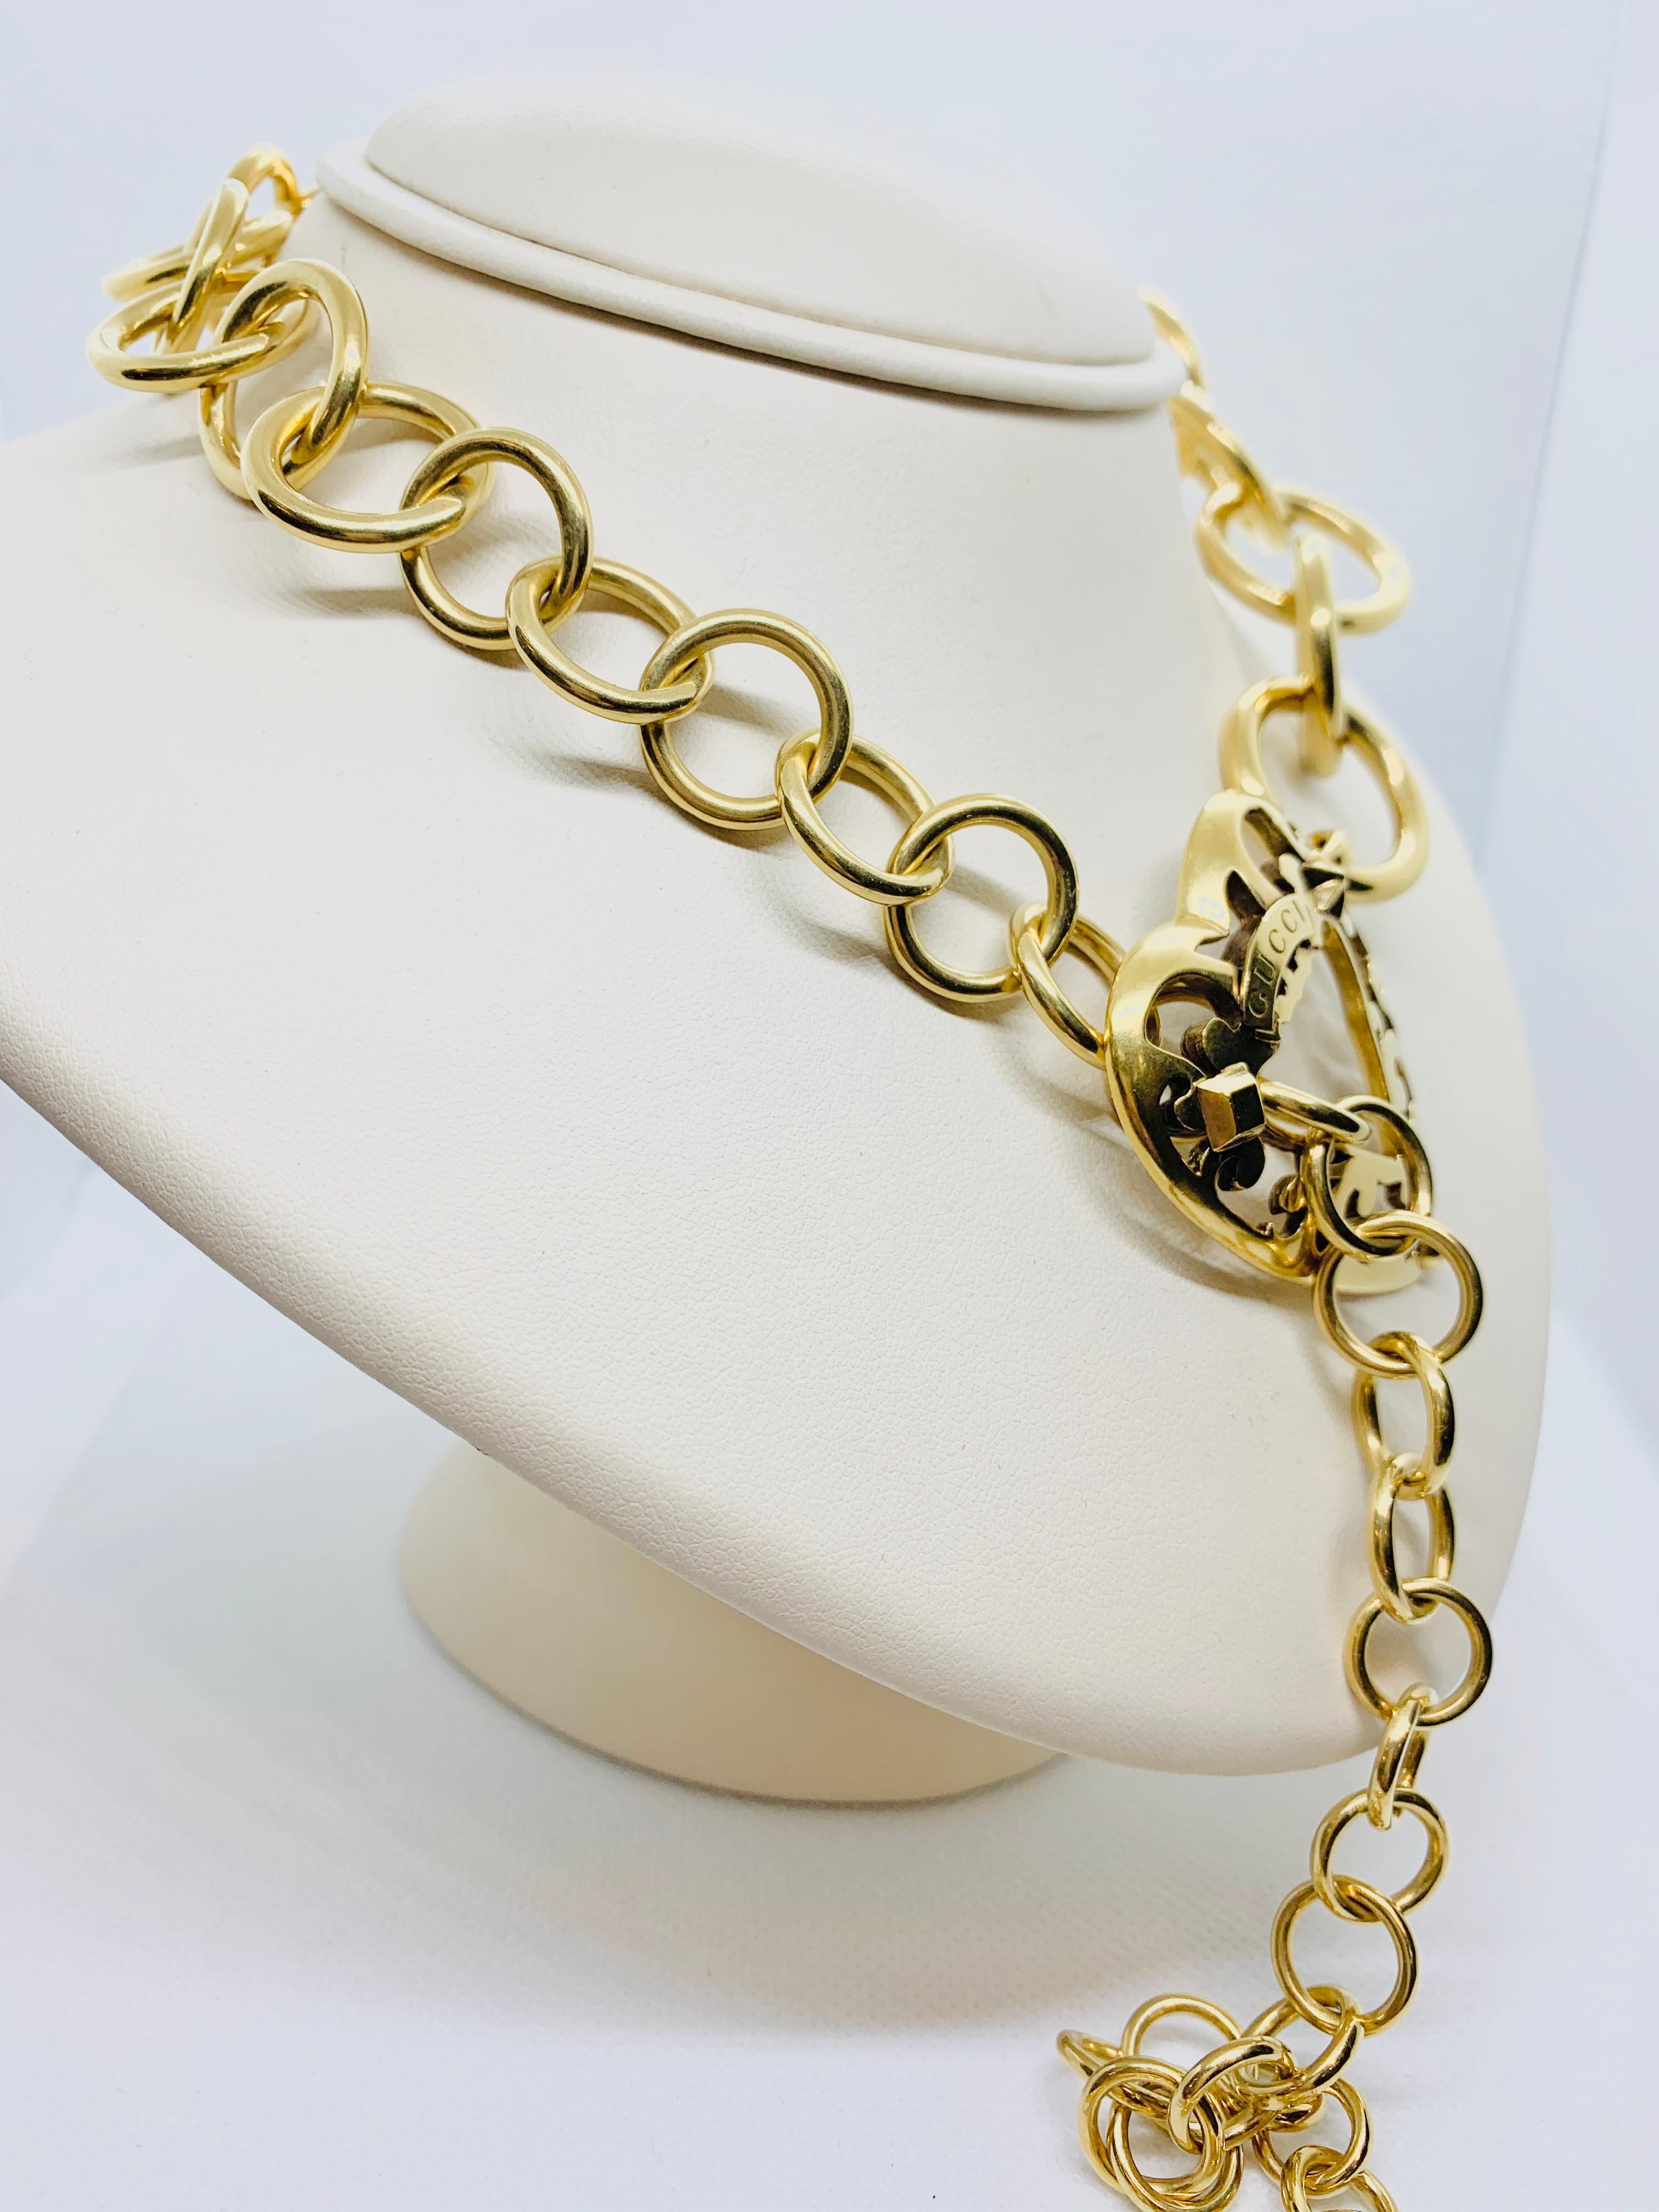 Contemporary Signed Gucci 18 Karat Gold Link Toggle Necklace with Heart Shaped Center Piece